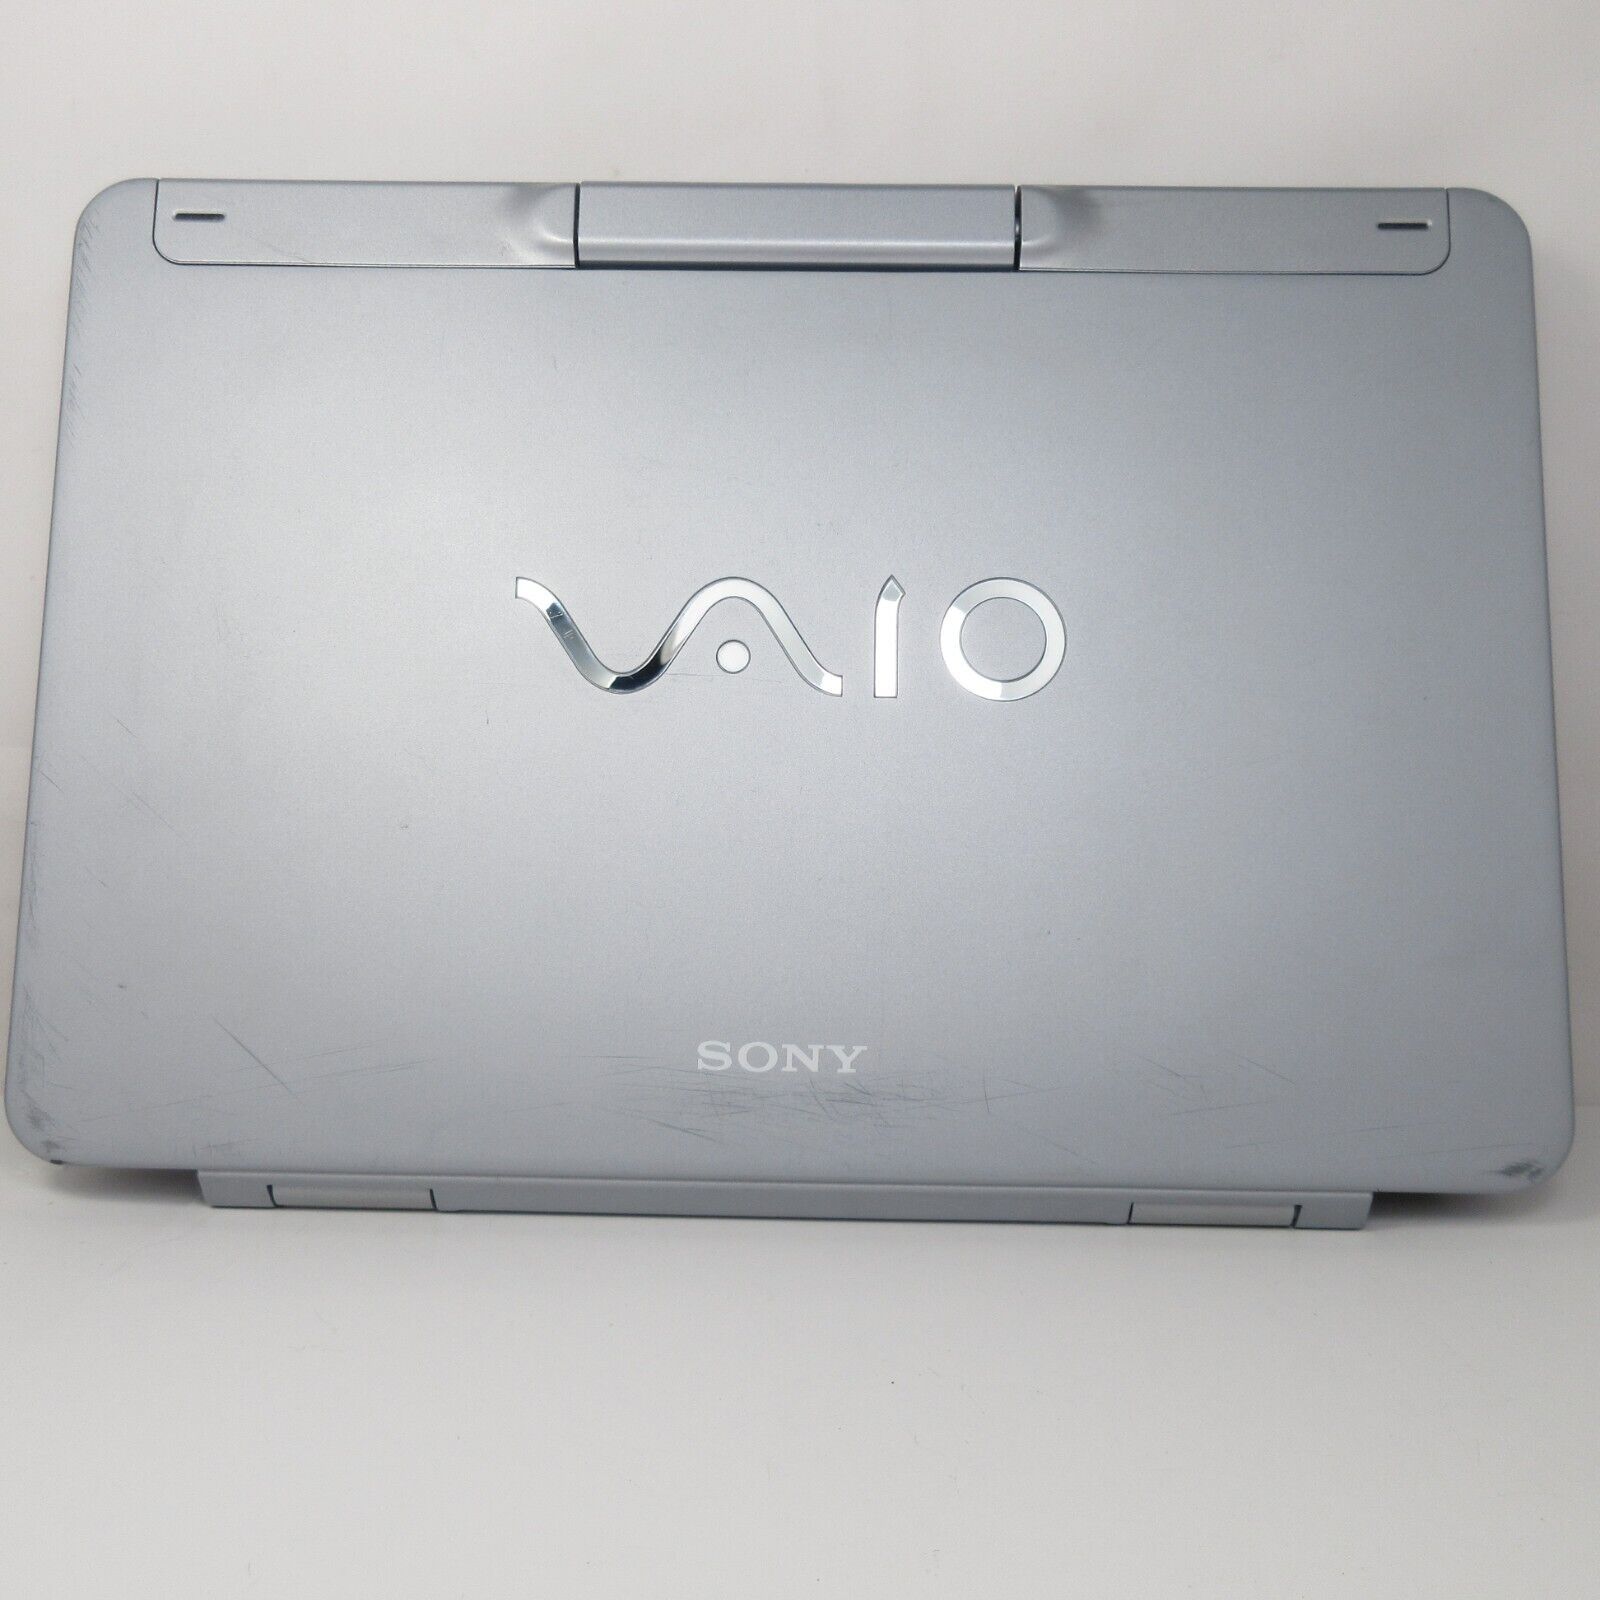 Primary image for Sony VAIO PCG-481L Laptop Notebook Computer UNTESTED NO POWER CORD Sold as PROP